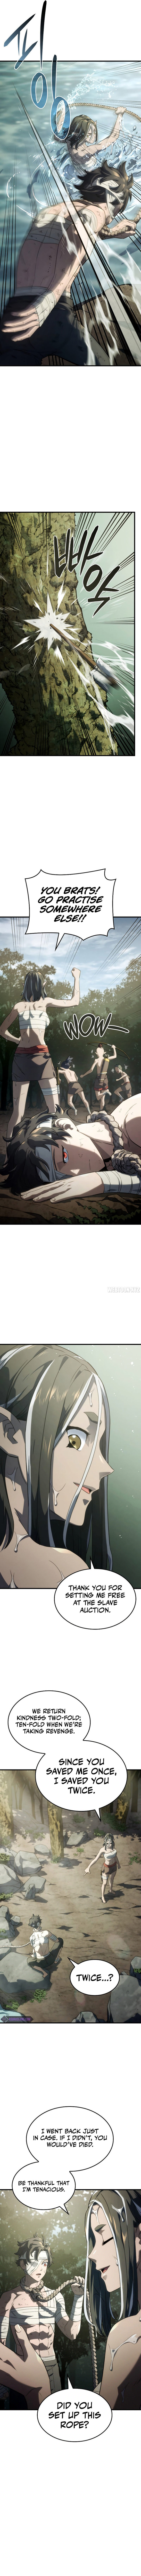 revenge-of-the-iron-blooded-sword-hound-chap-32-9